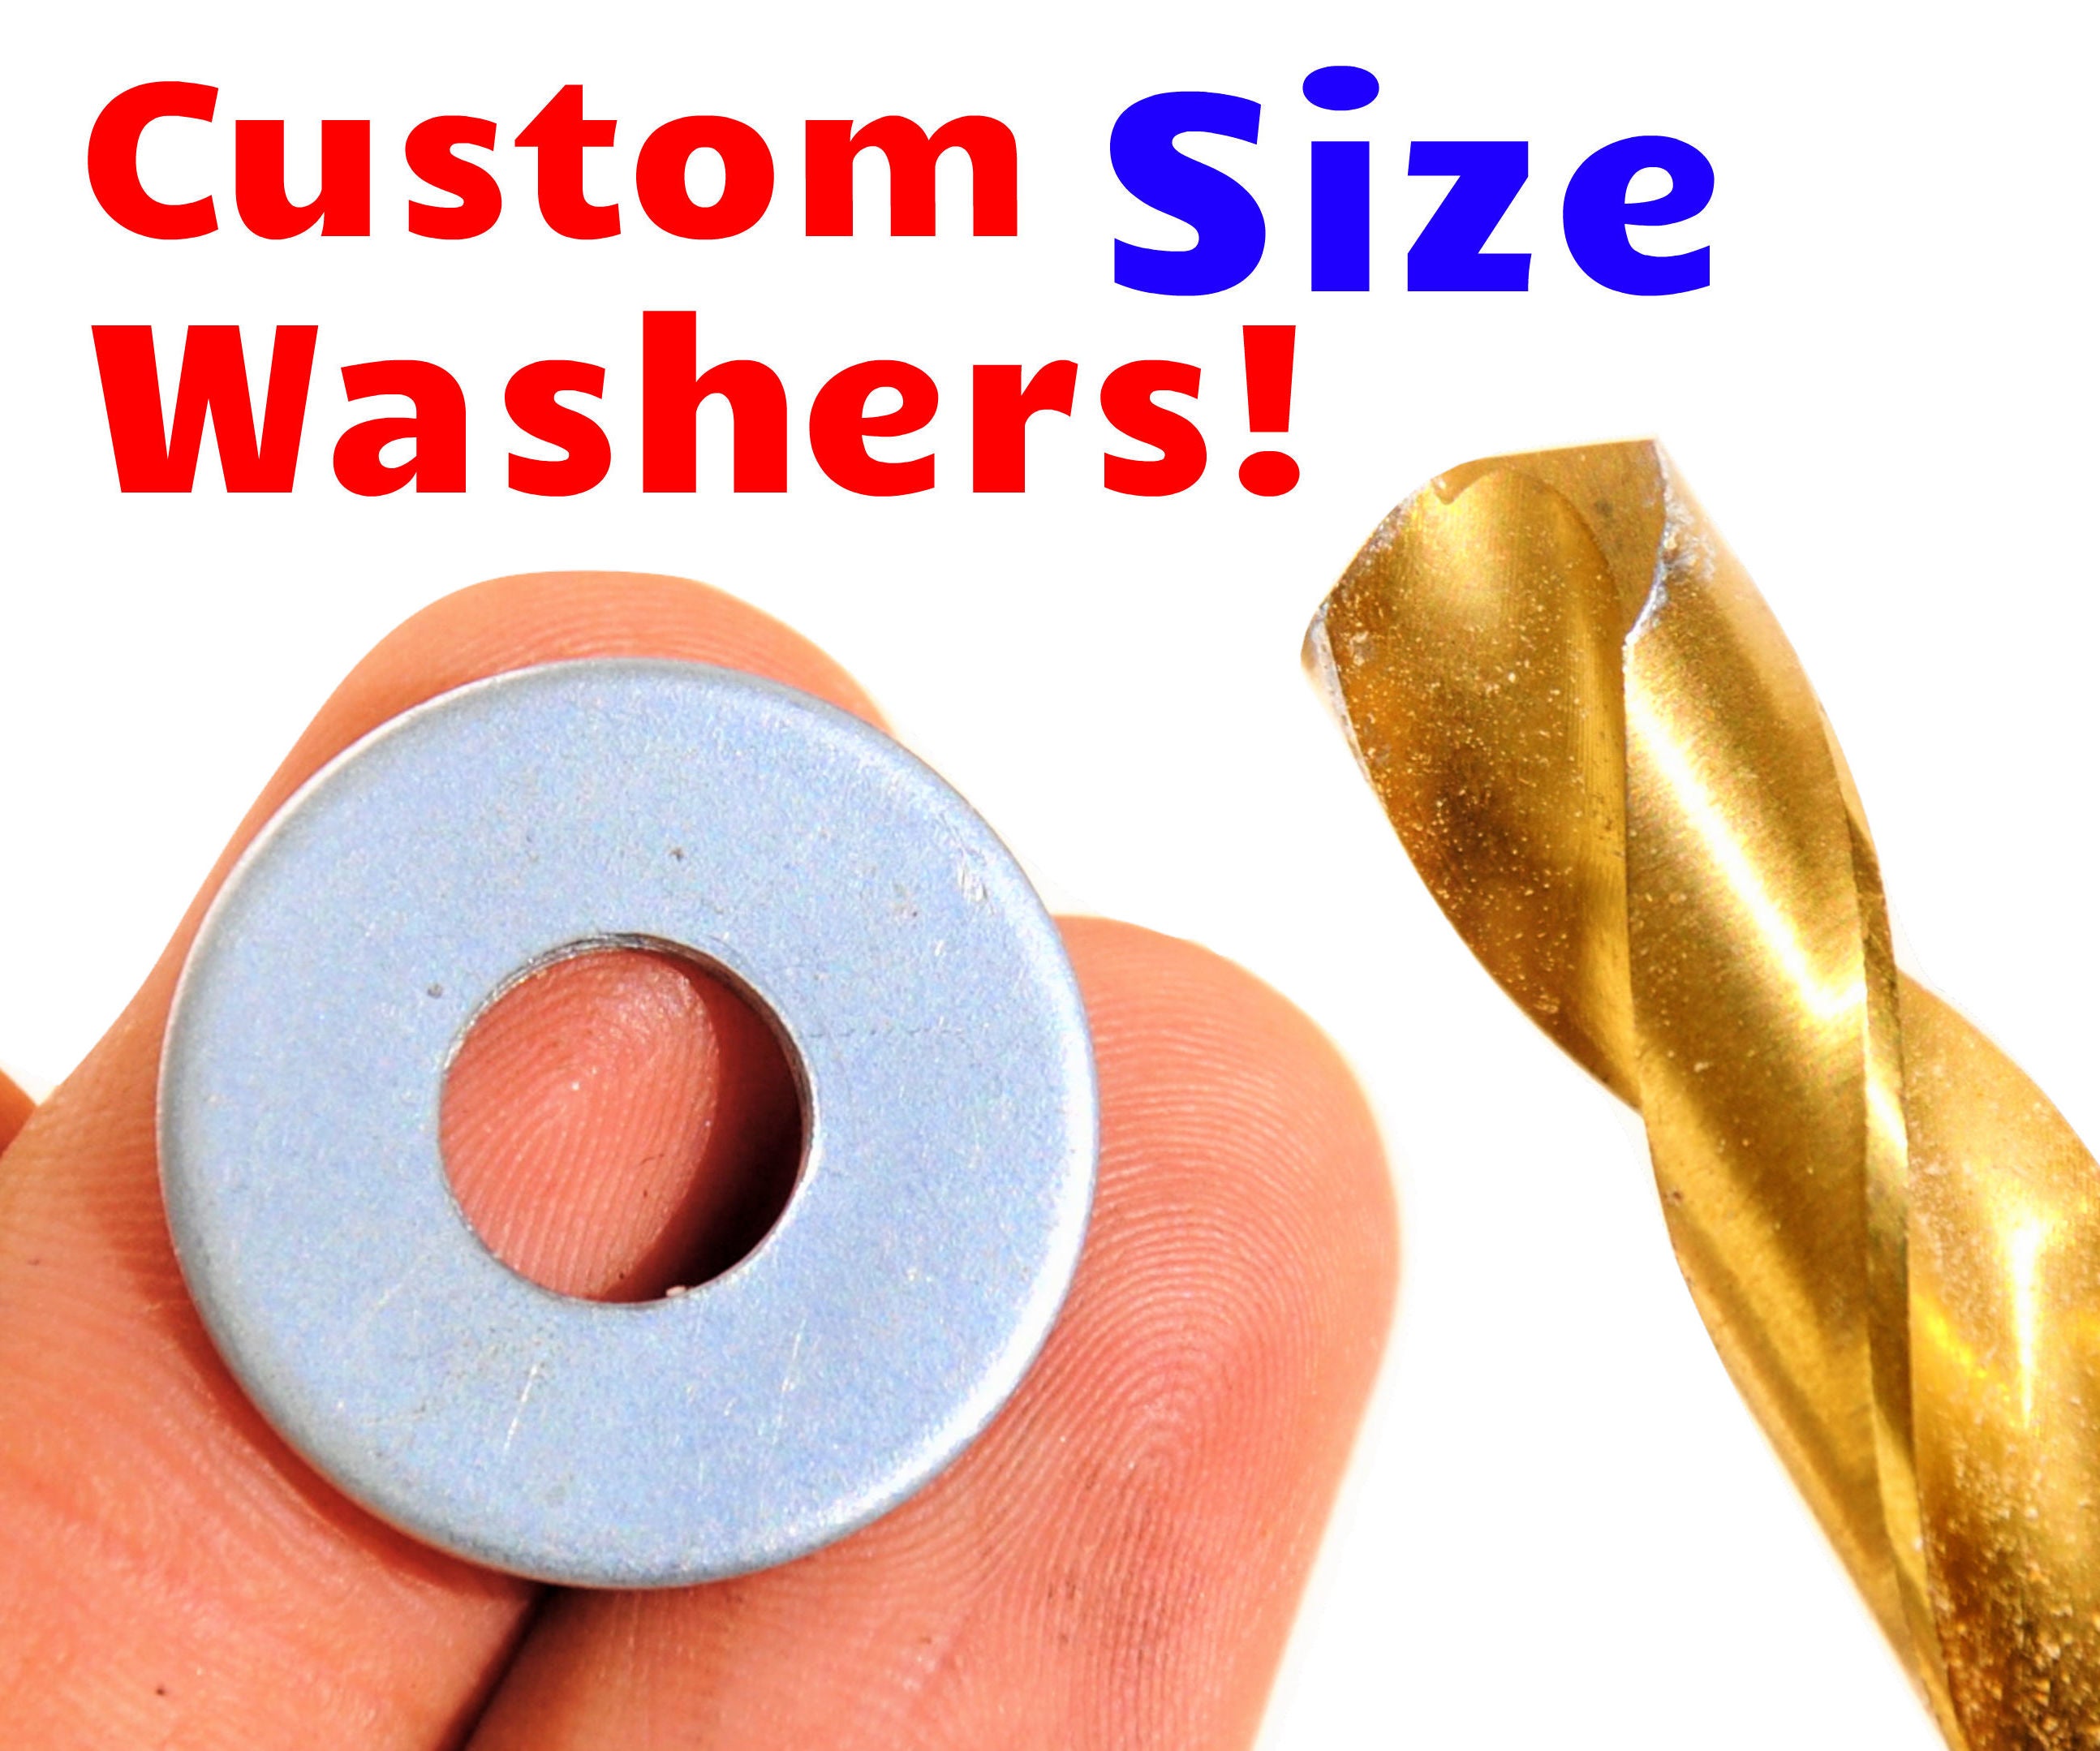 How to Enlarge a Washer (No Drill Press Needed!)